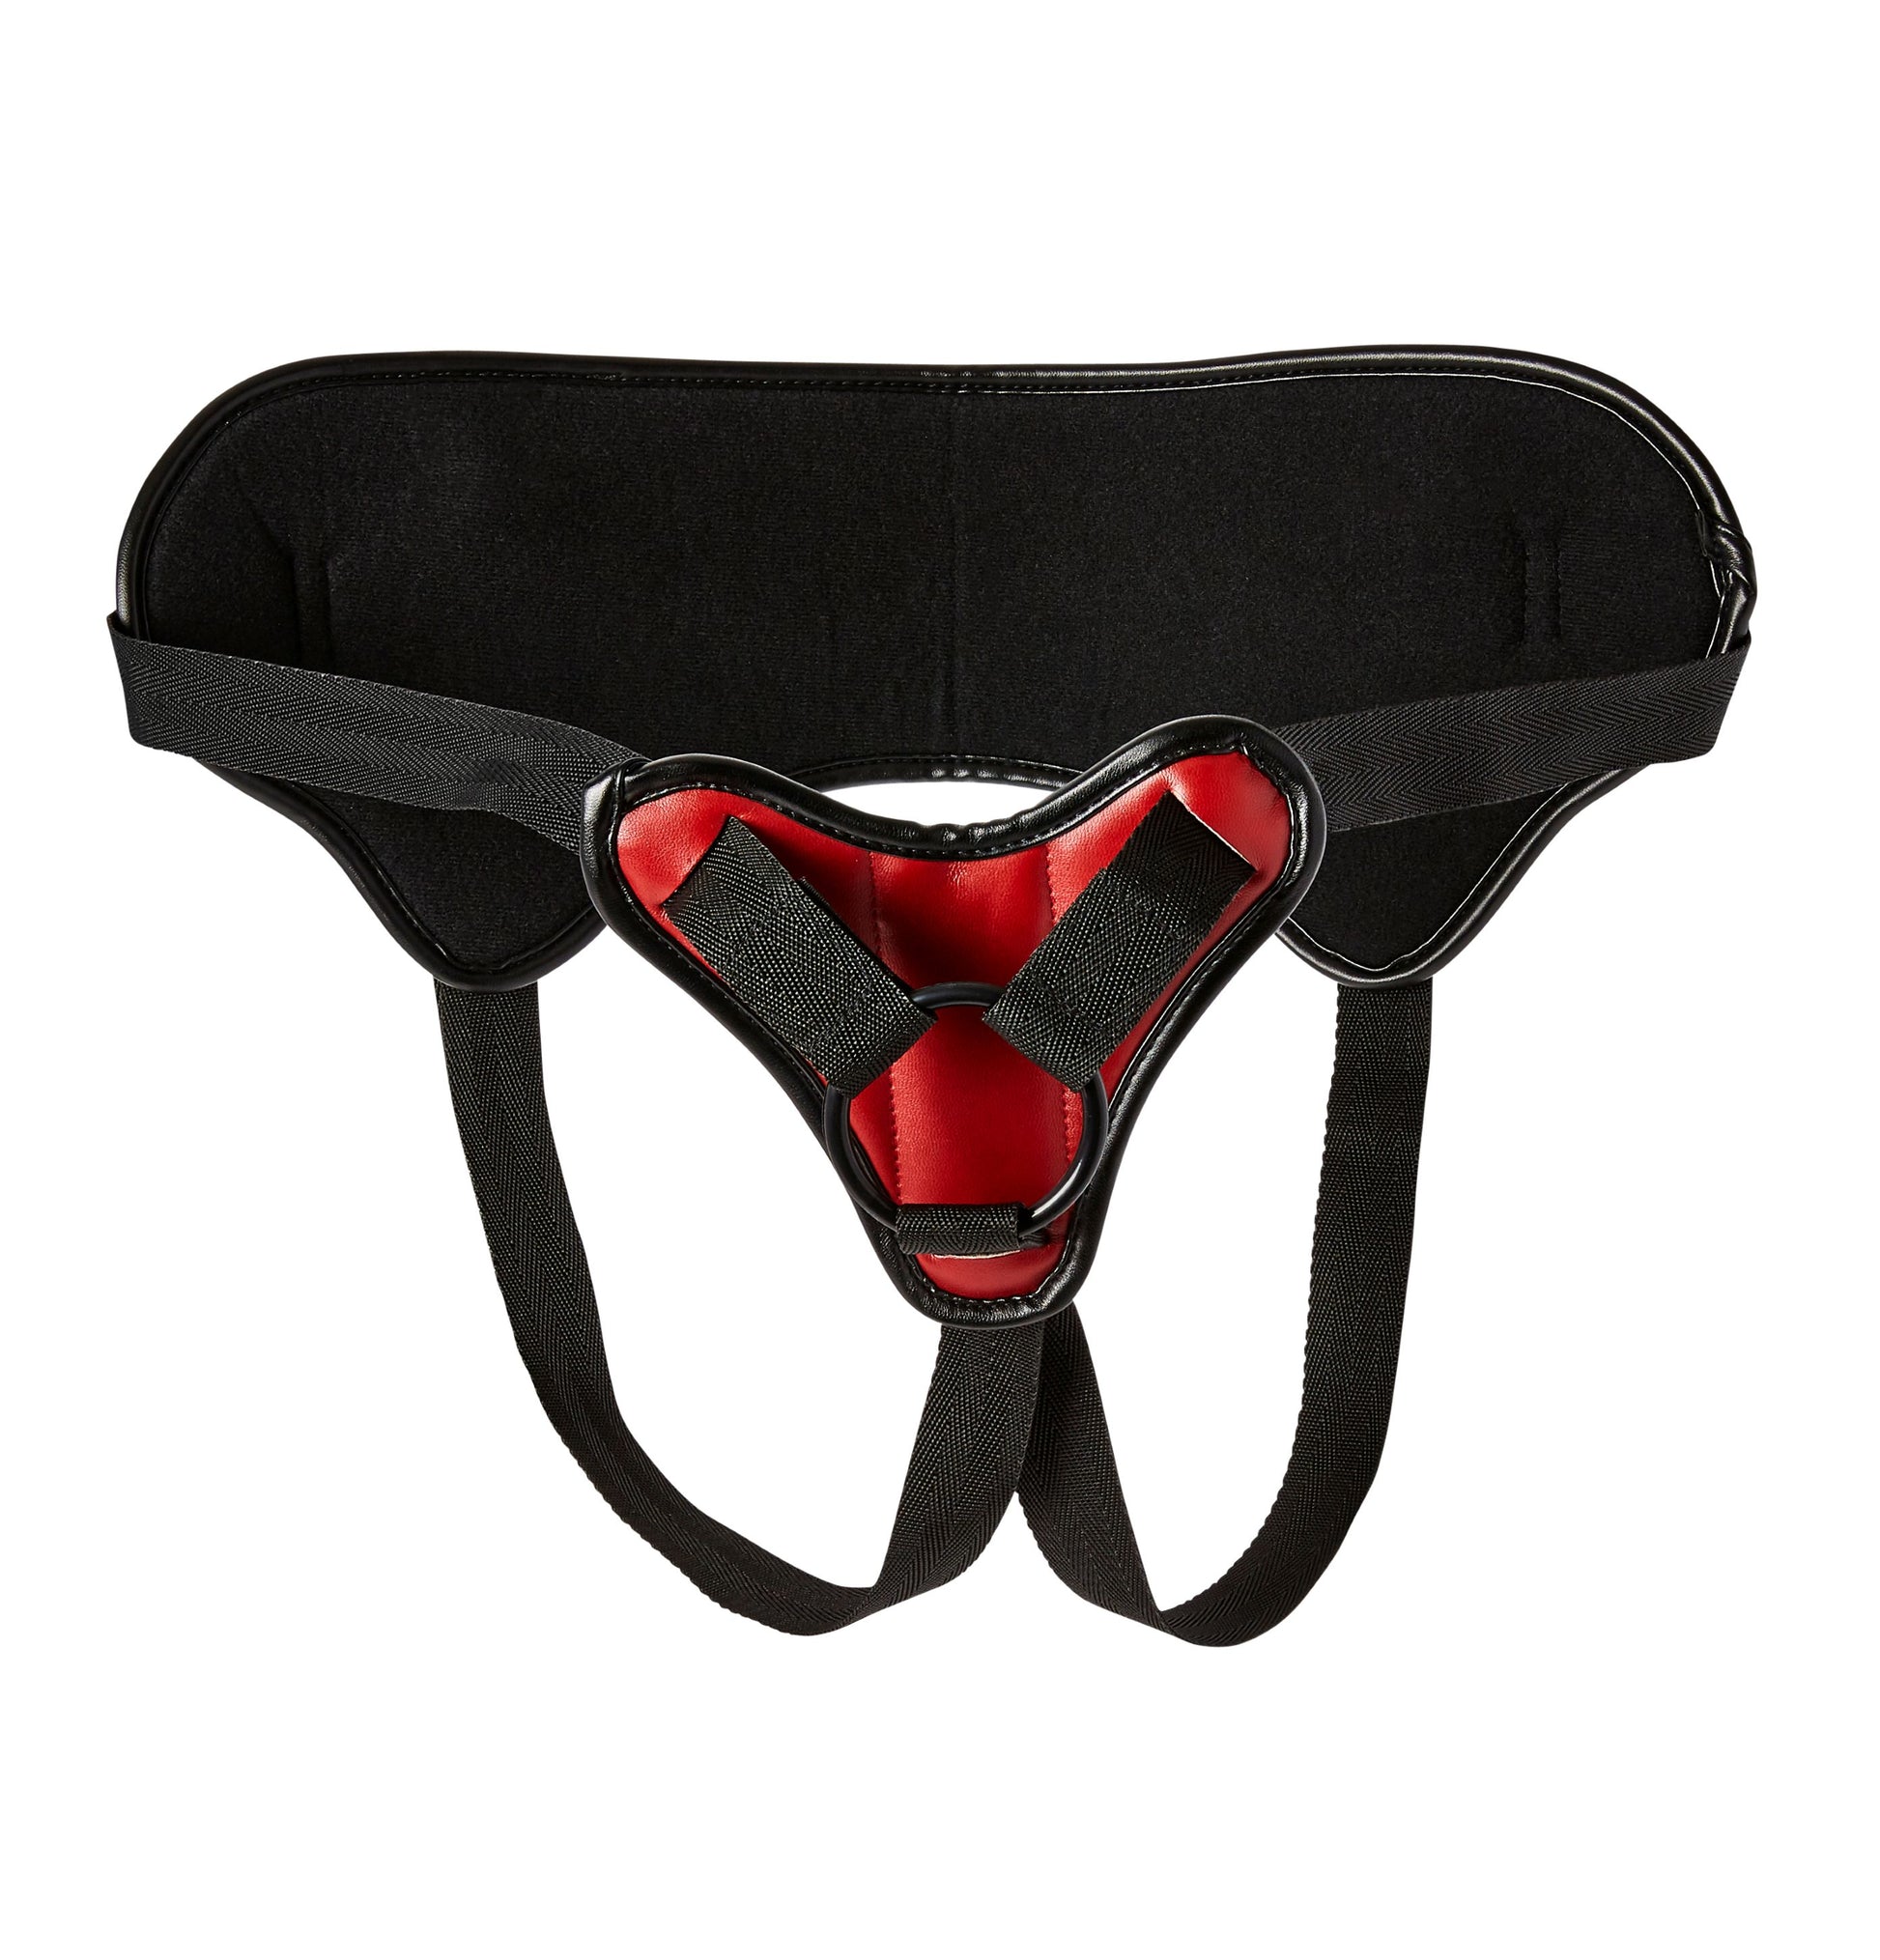 Front view of the harness showing the O-ring for holding the dildo.